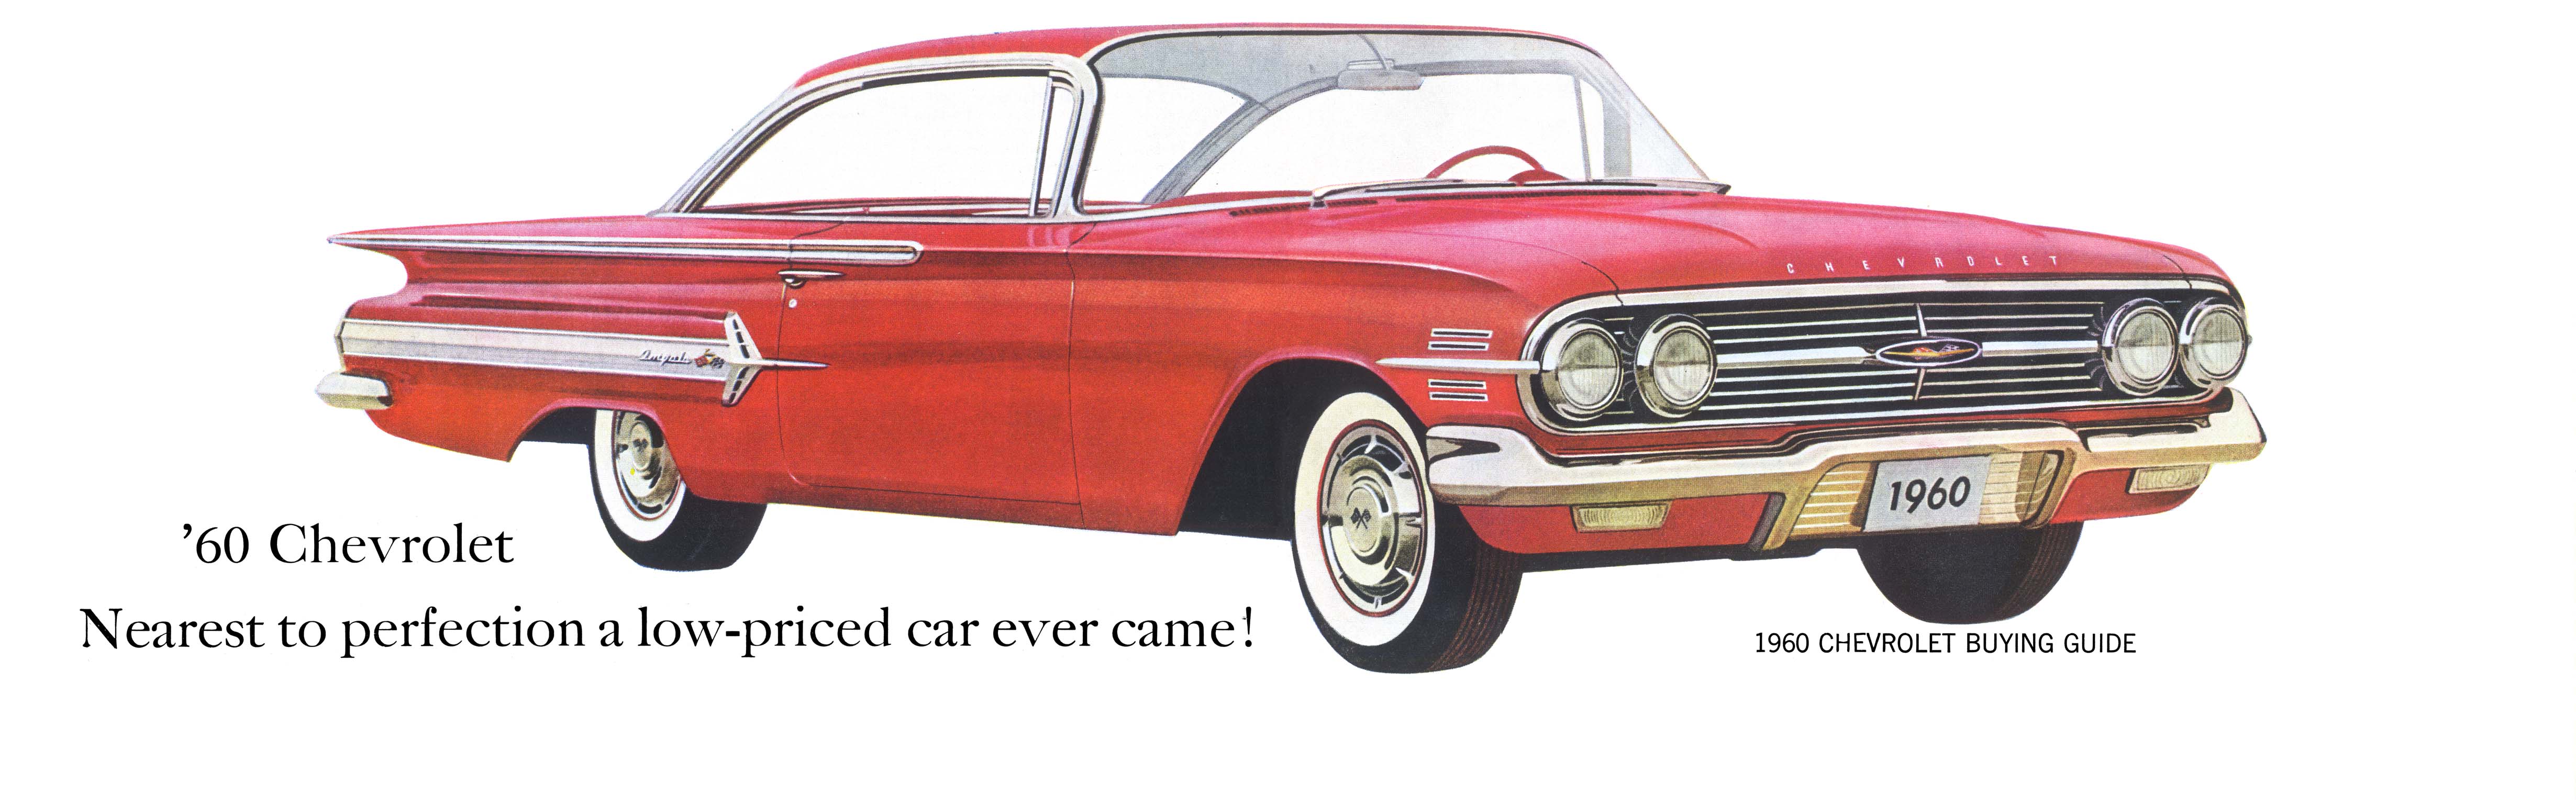 1960_Chevrolet_Buying_Guide-08-01